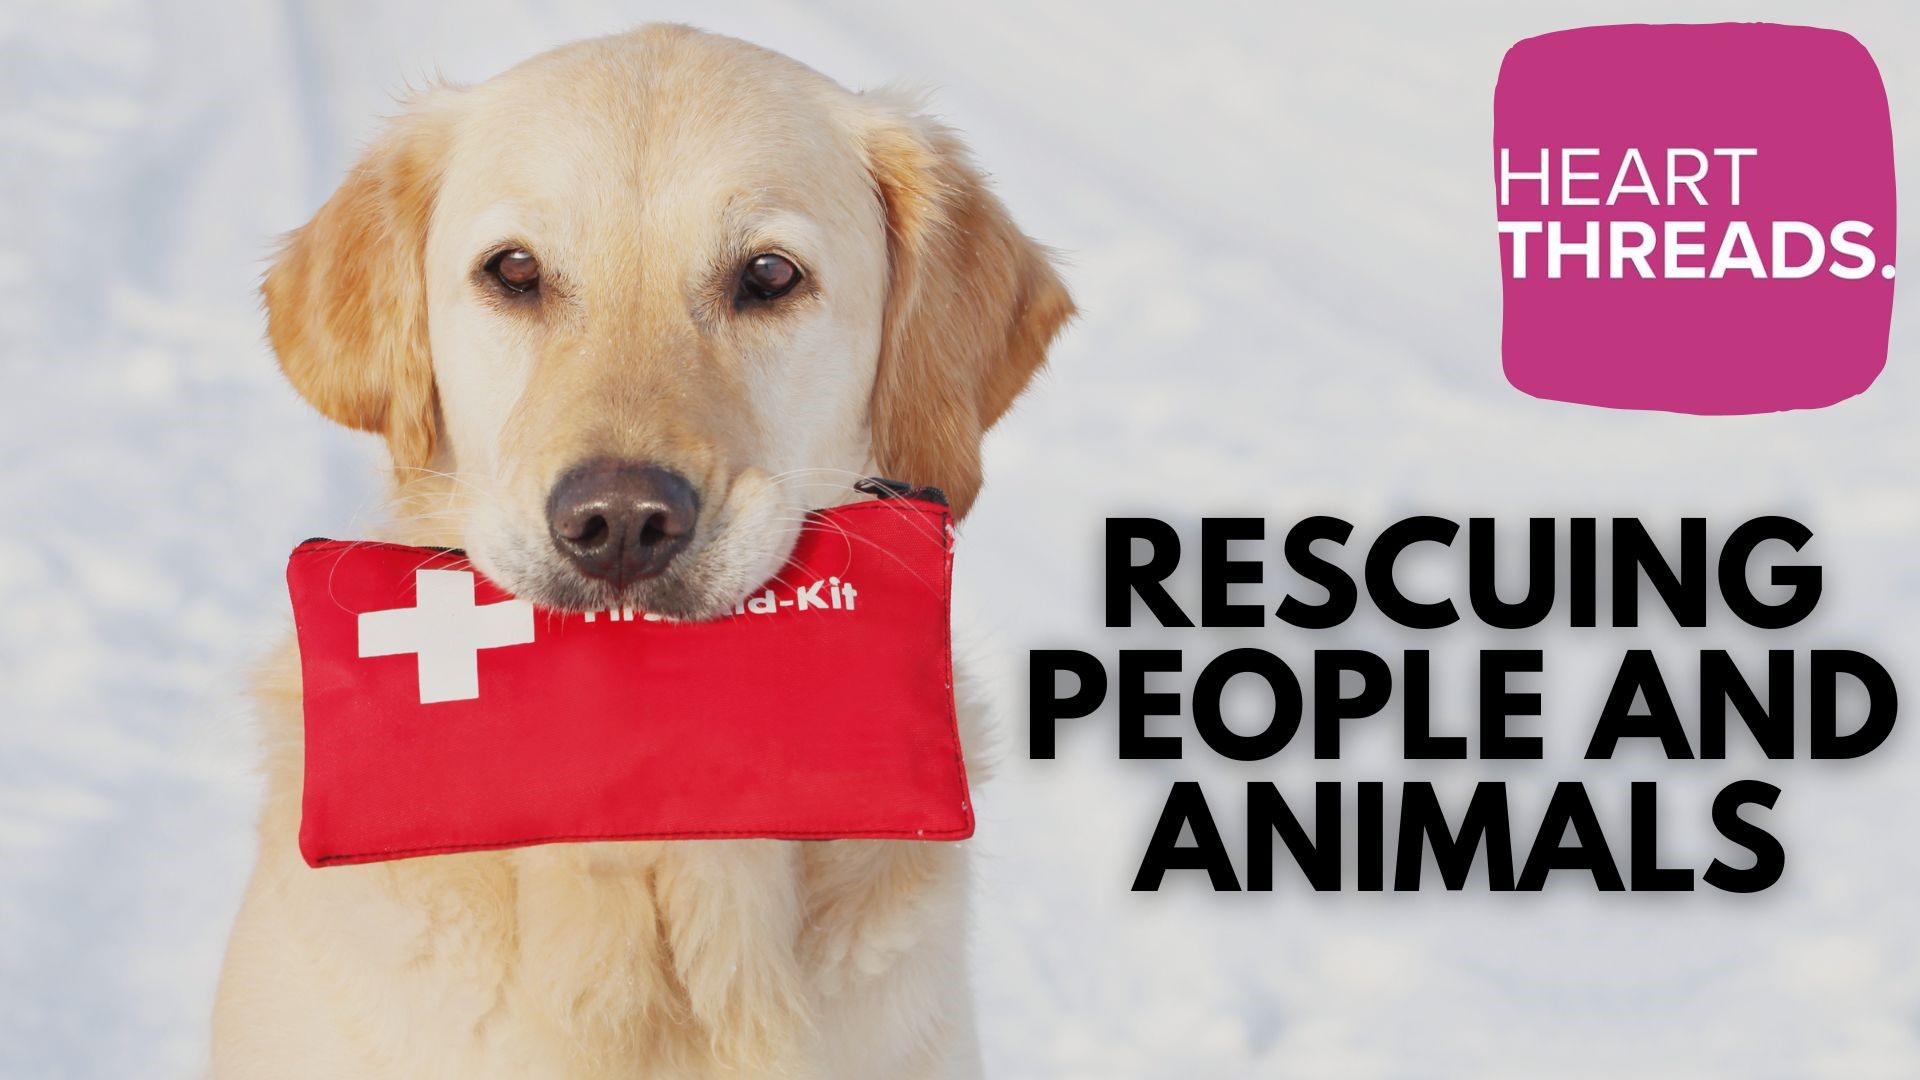 Heartwarming stories detailing life-saving rescues, not only for humans, but for pets and animals as well.